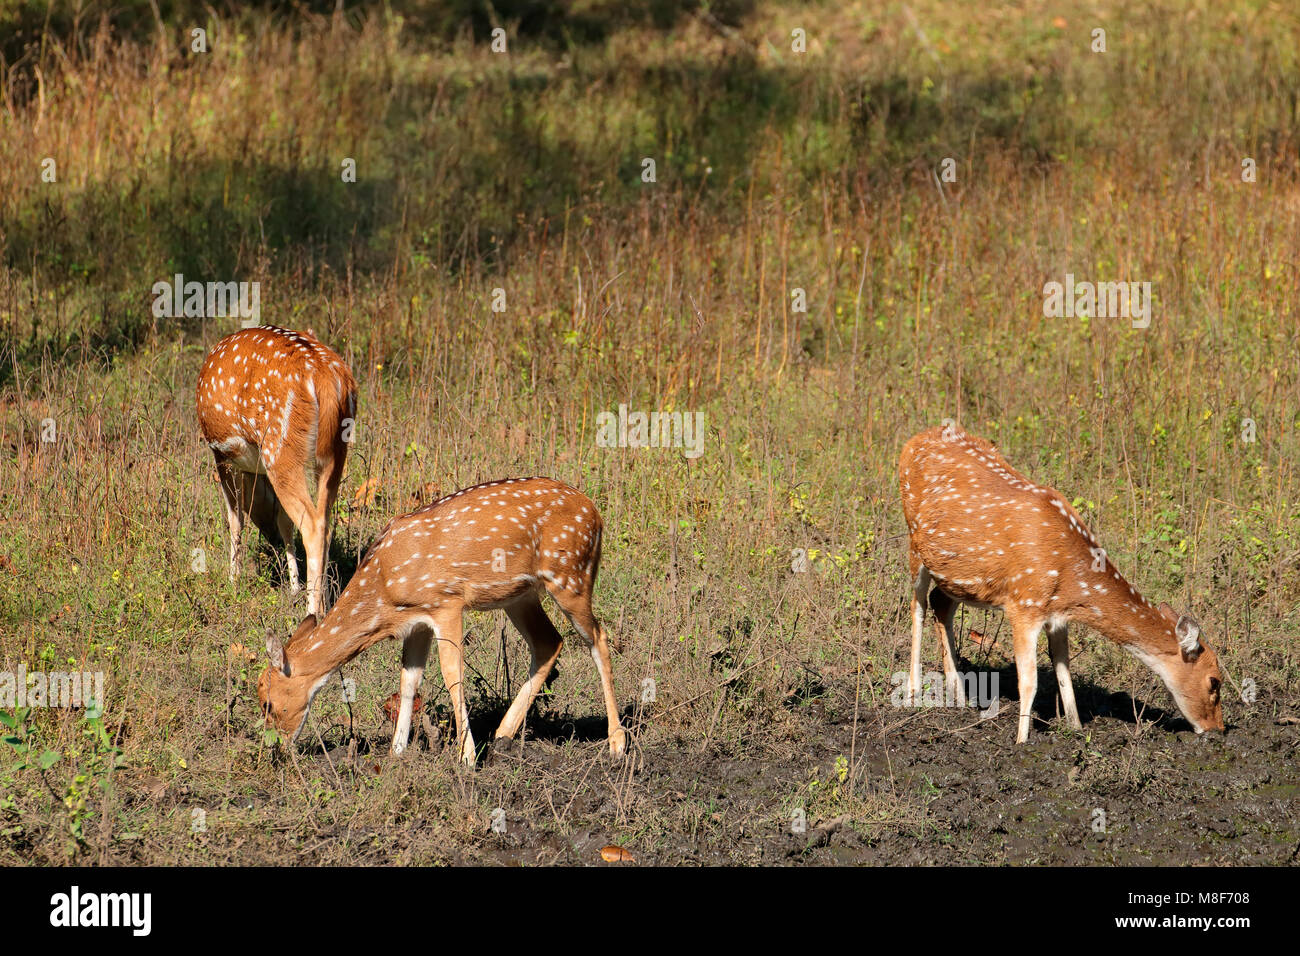 Spotted deer (Axis axis) in natural habitat, Kanha National Park, India Stock Photo